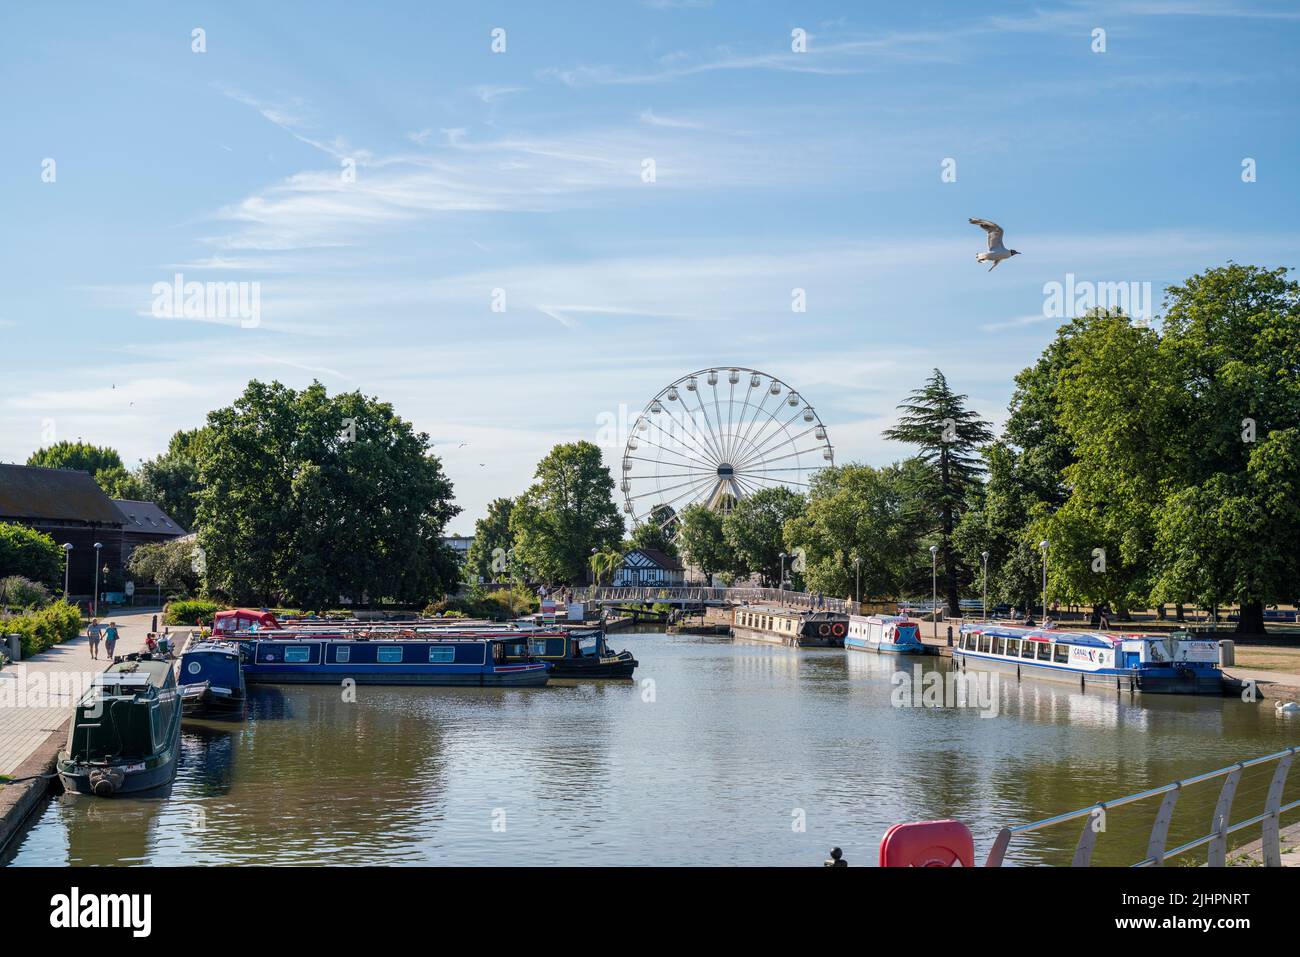 General view of the River Avon running through Stratford-upon-Avon on a sunny day. Stock Photo